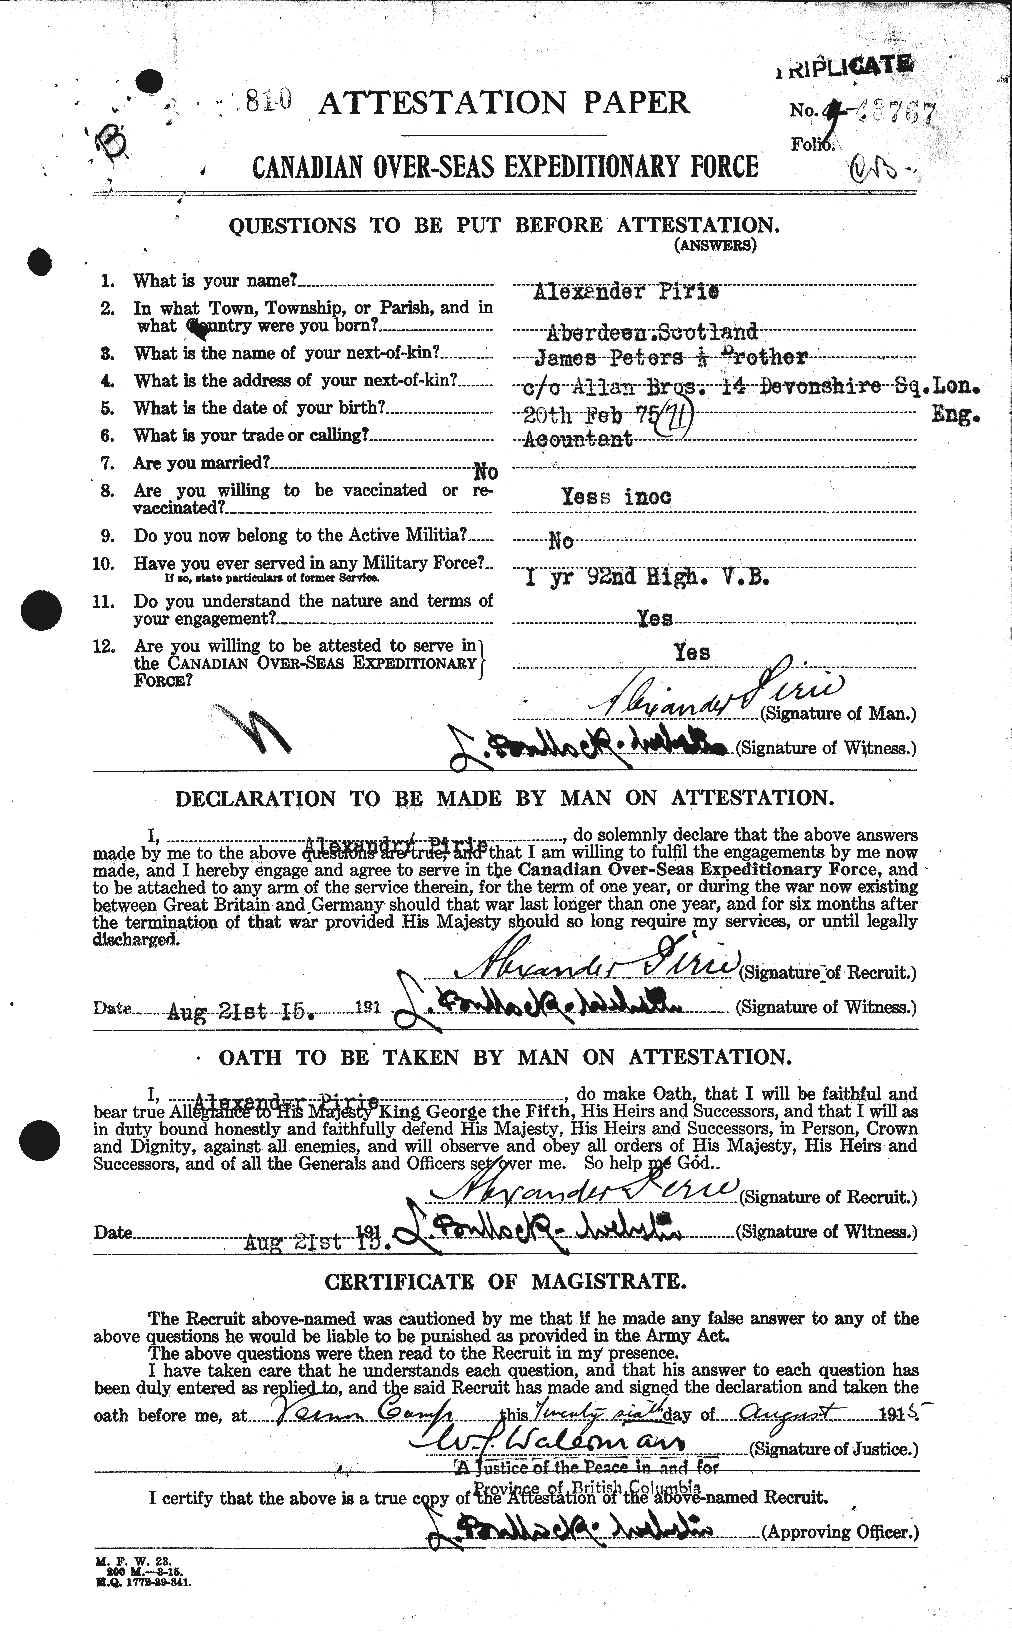 Personnel Records of the First World War - CEF 583300a